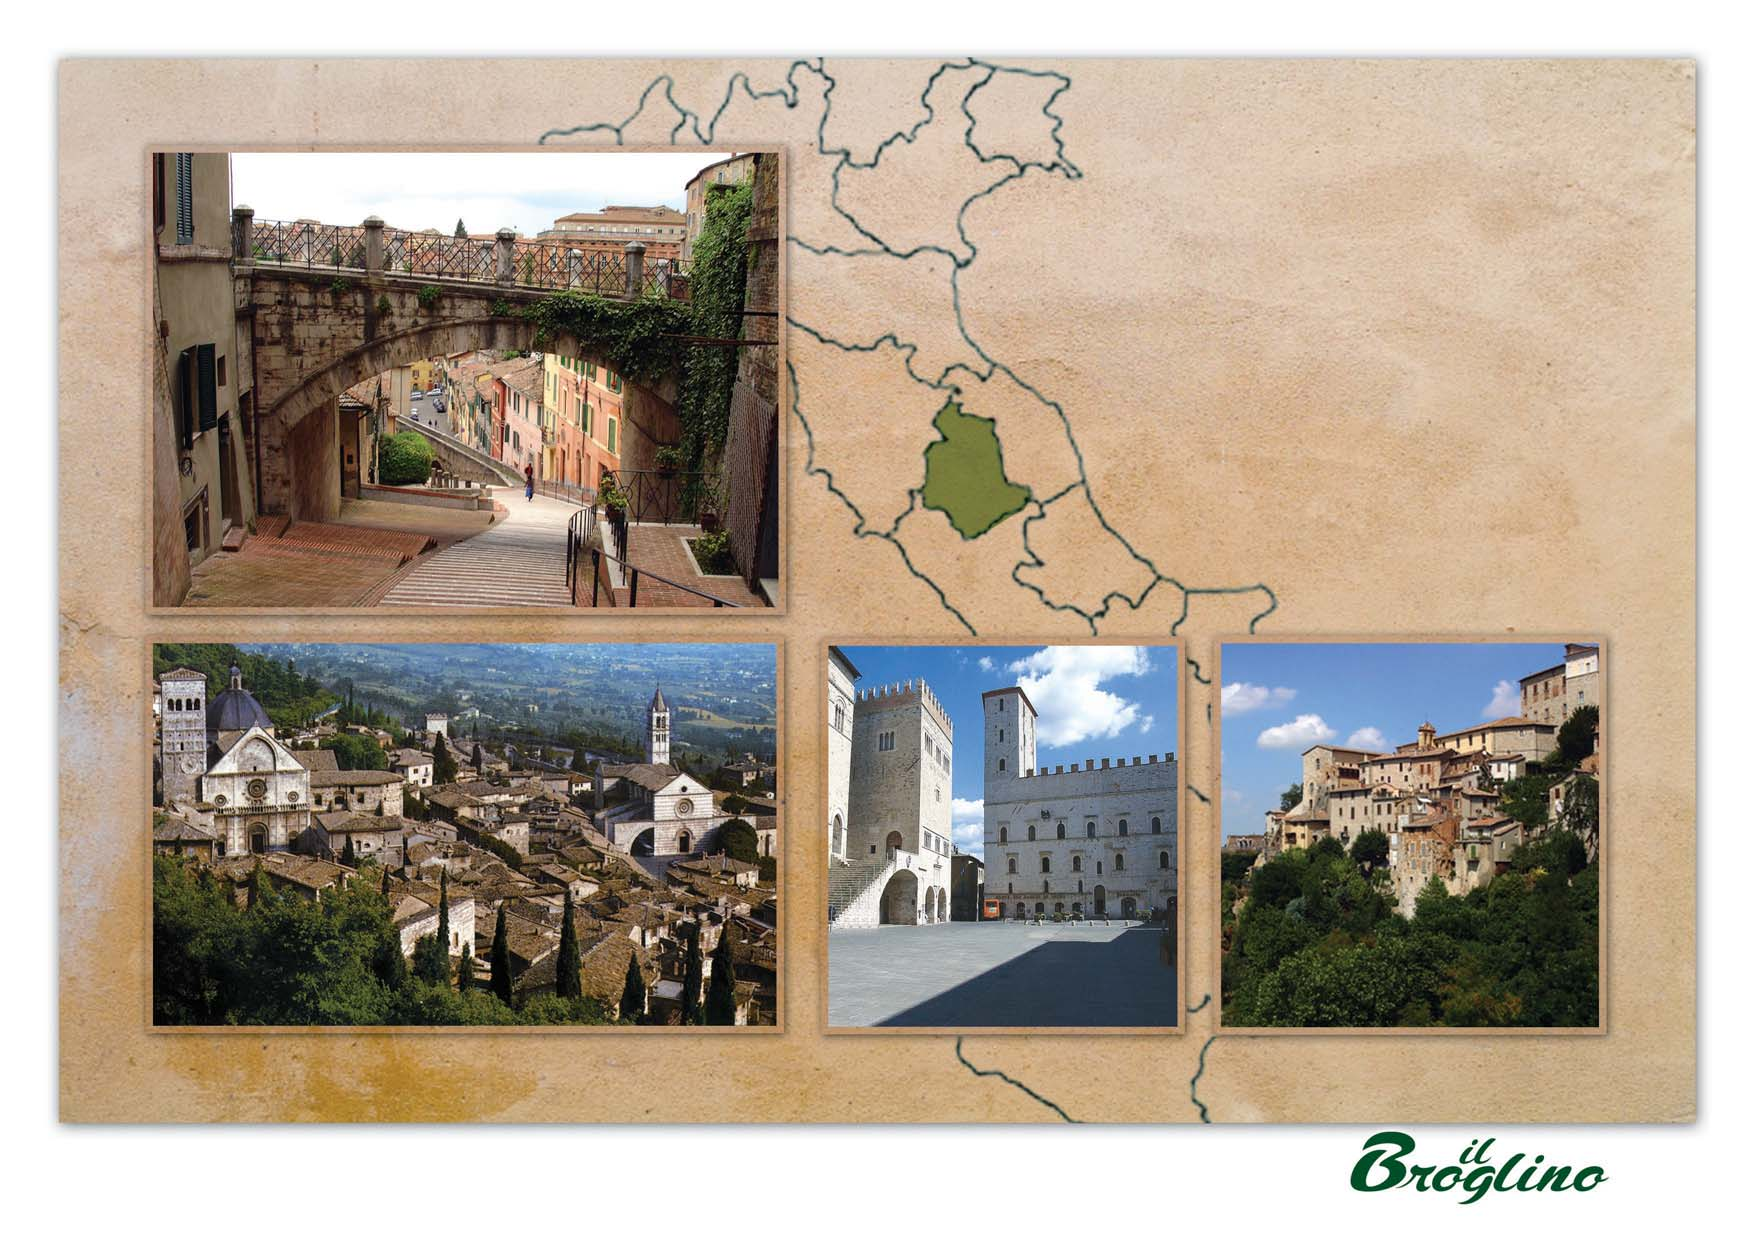 Umbria is a region of Italy rich with things to see so it is worth your trip by itself.